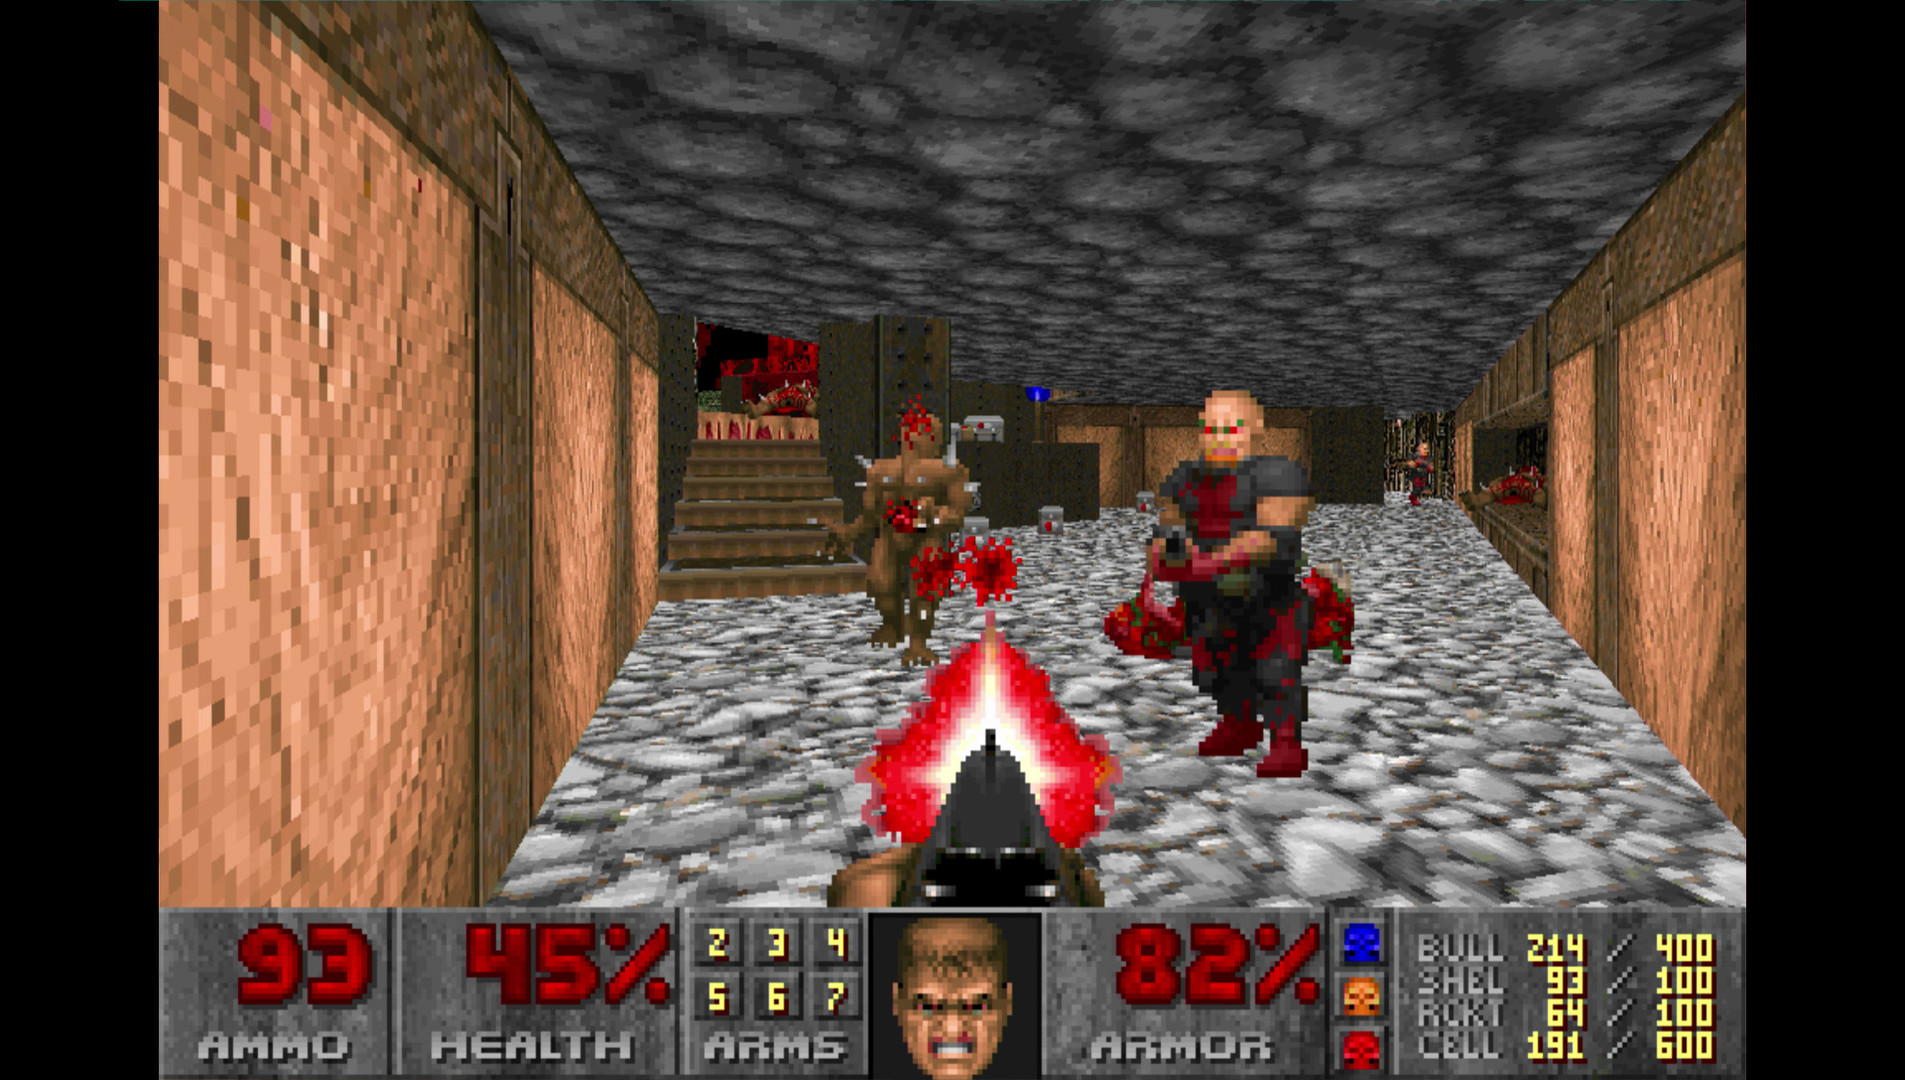 The Ultimate Doom Review: A Classic Game That Still Holds Up Today